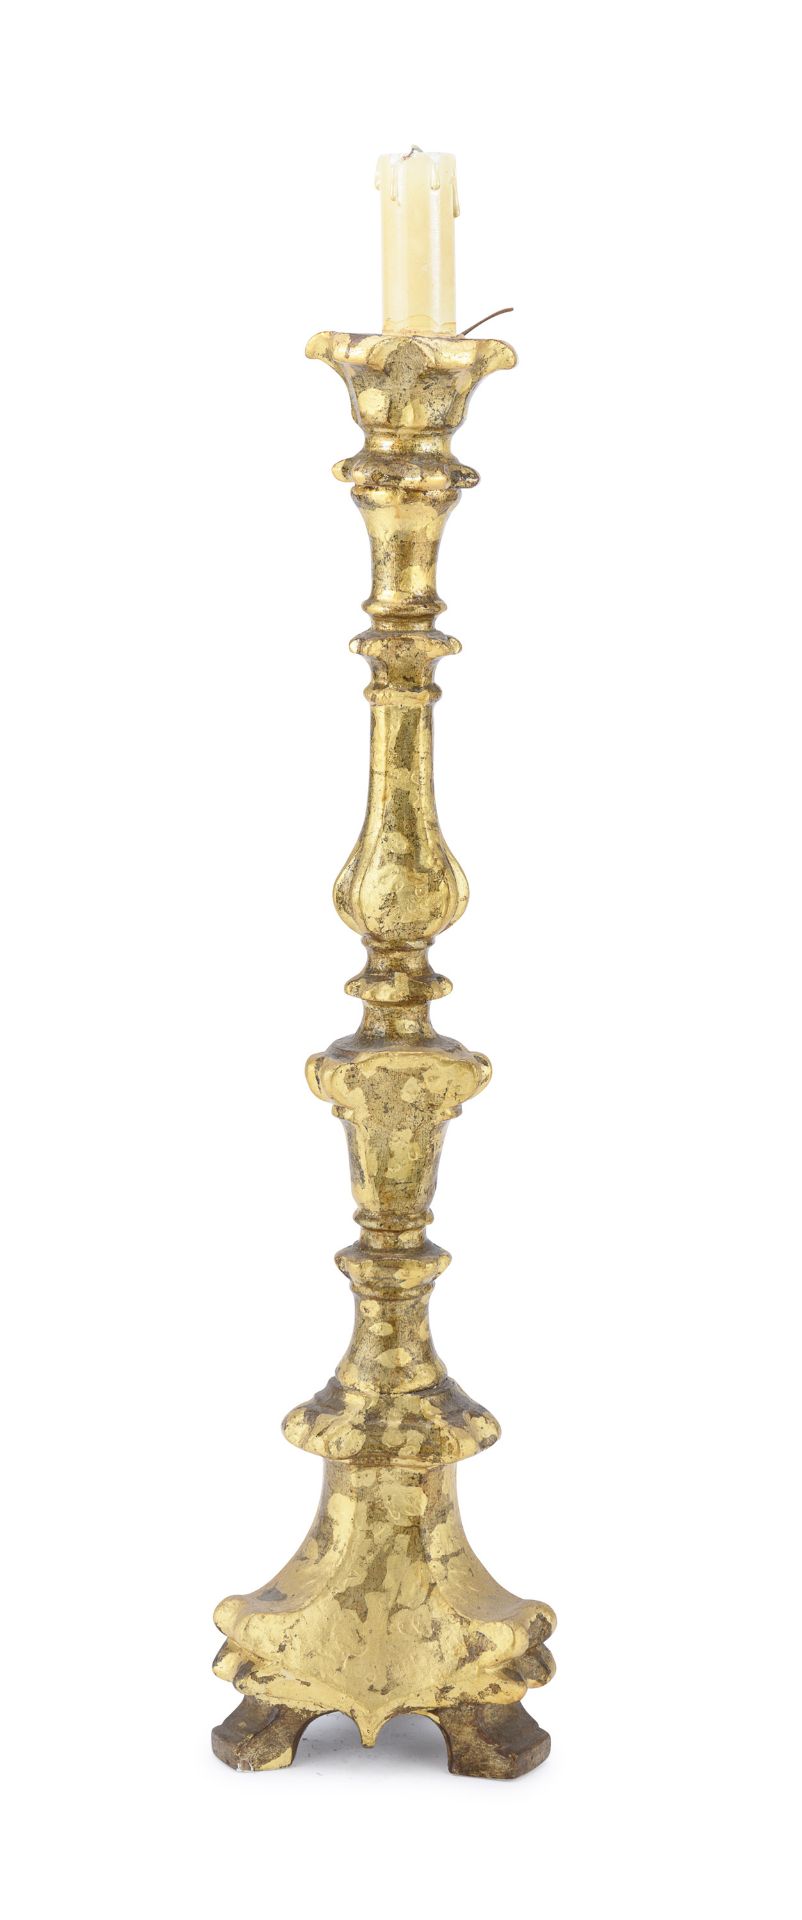 GILTWOOD CANDLESTICK 18TH CENTURY